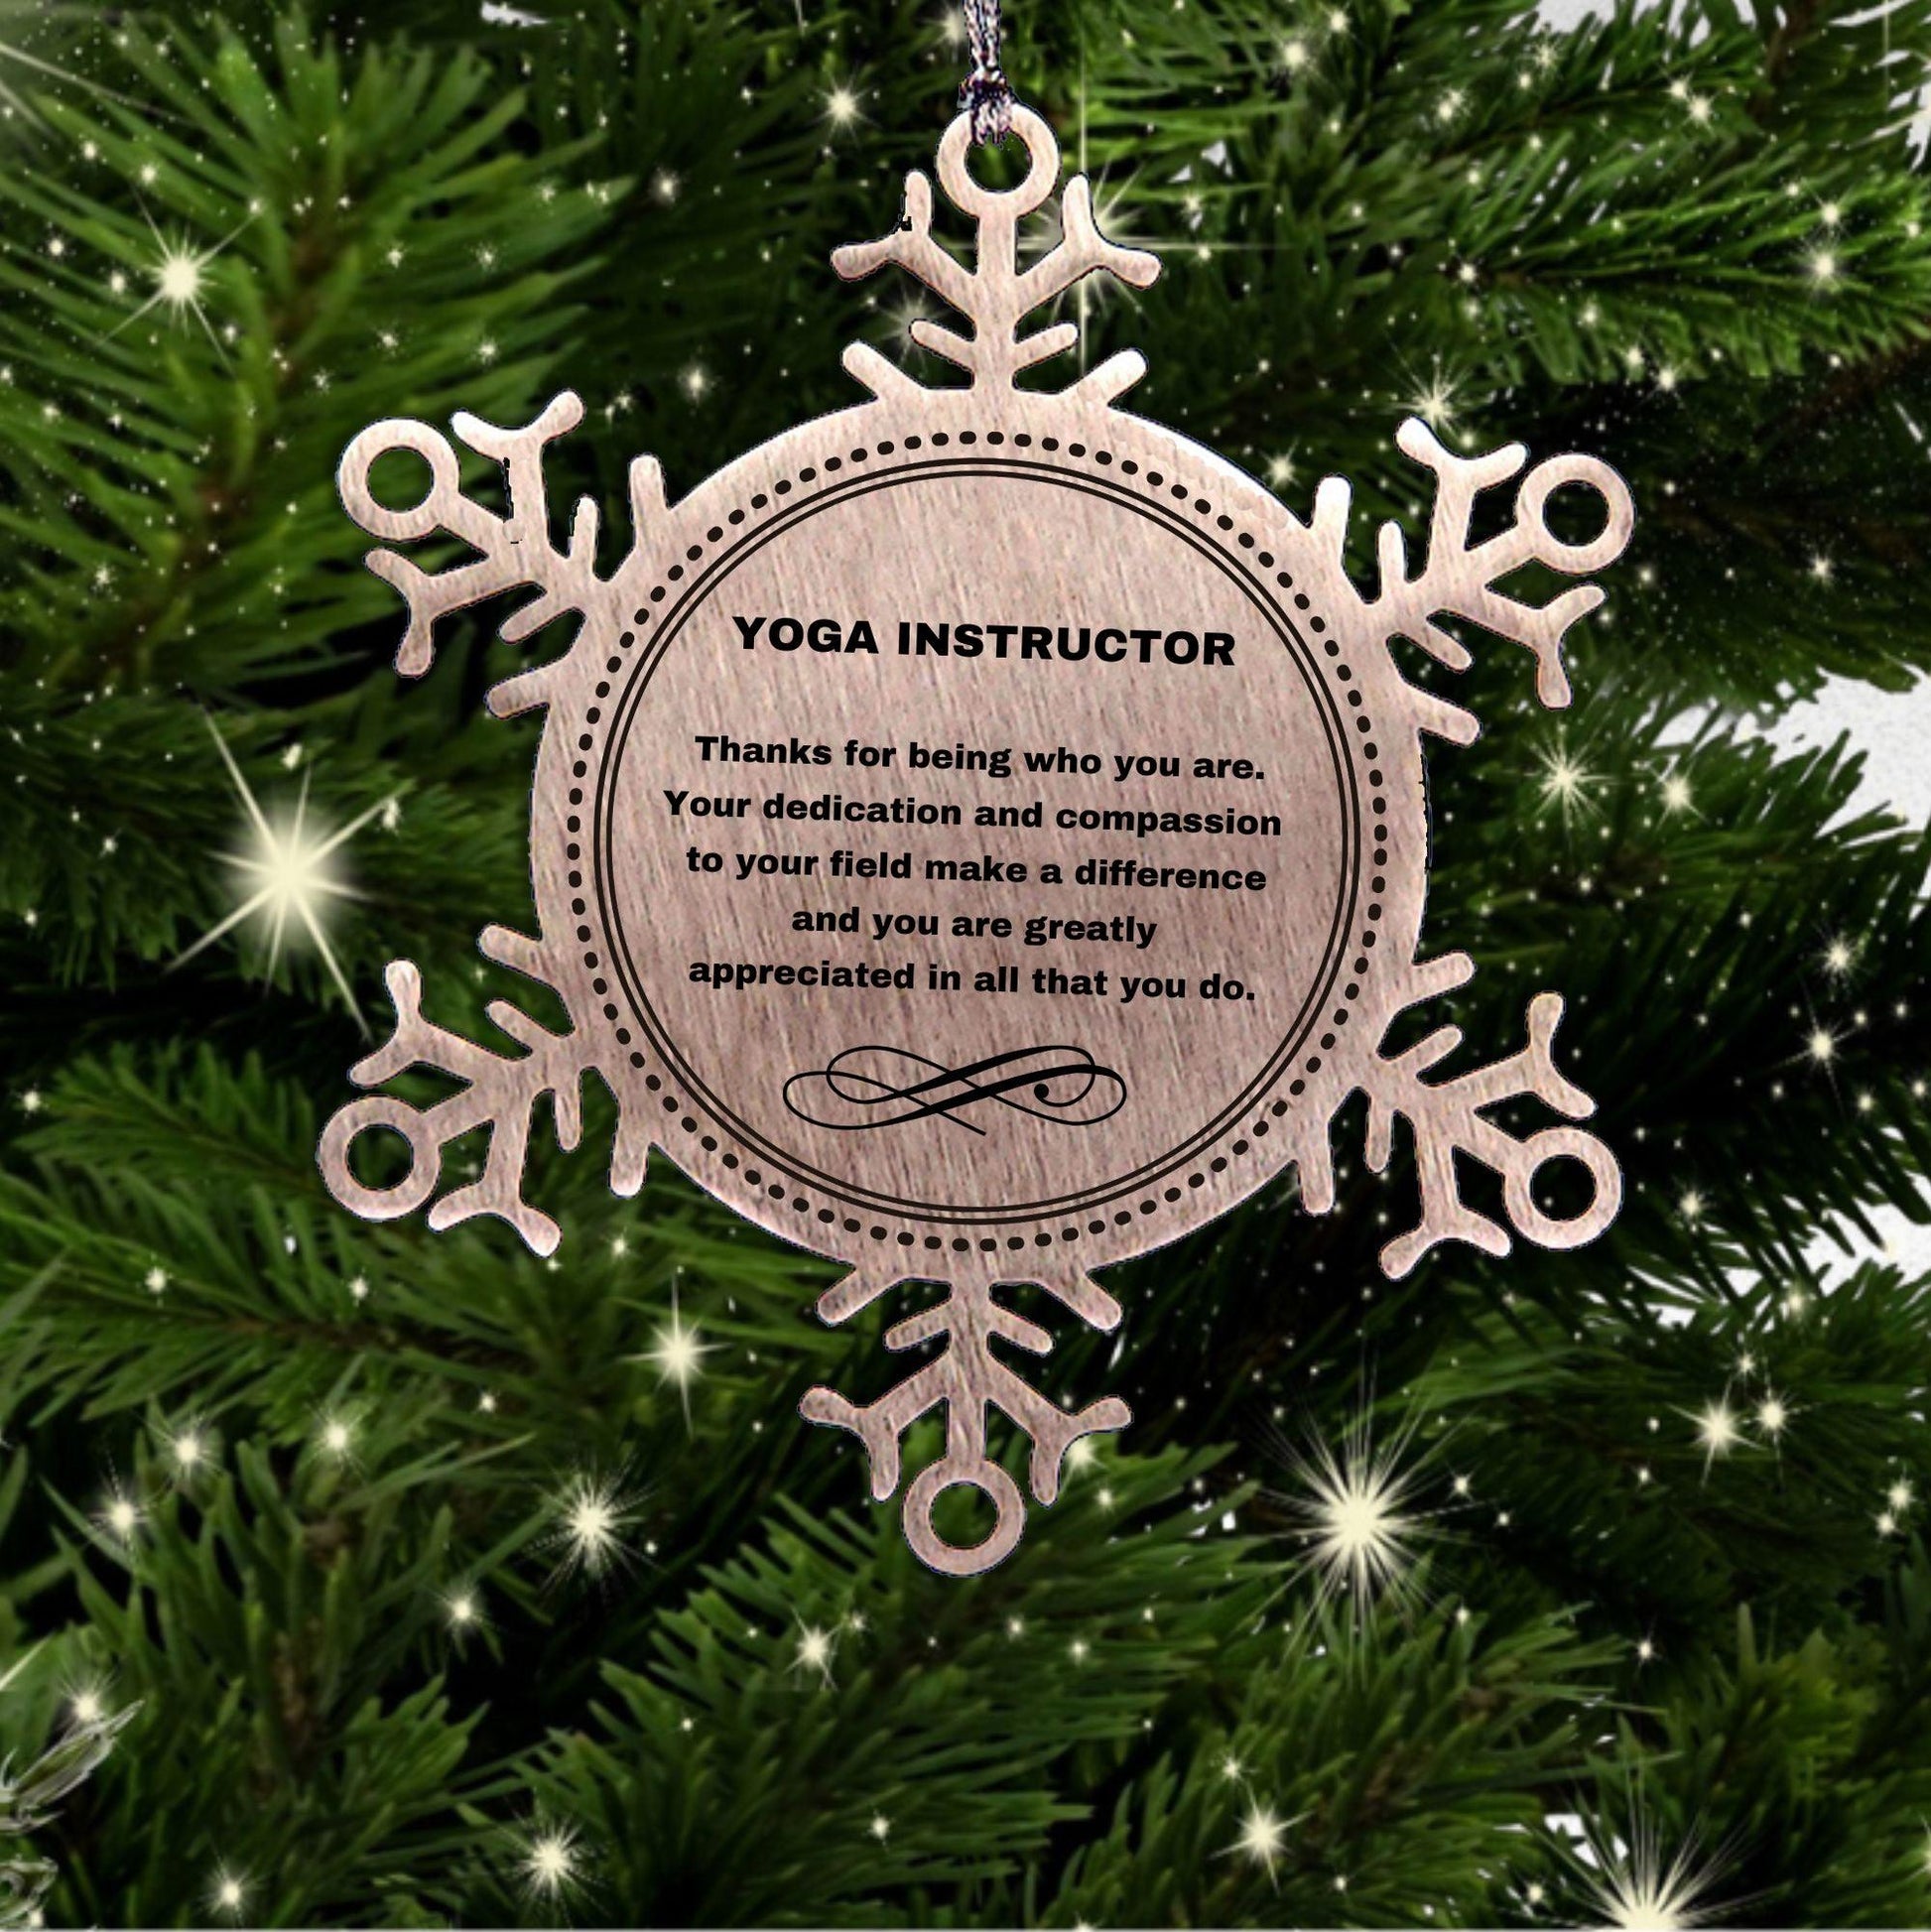 Yoga Instructor Snowflake Ornament - Thanks for being who you are - Birthday Christmas Jewelry Gifts Coworkers Colleague Boss - Mallard Moon Gift Shop